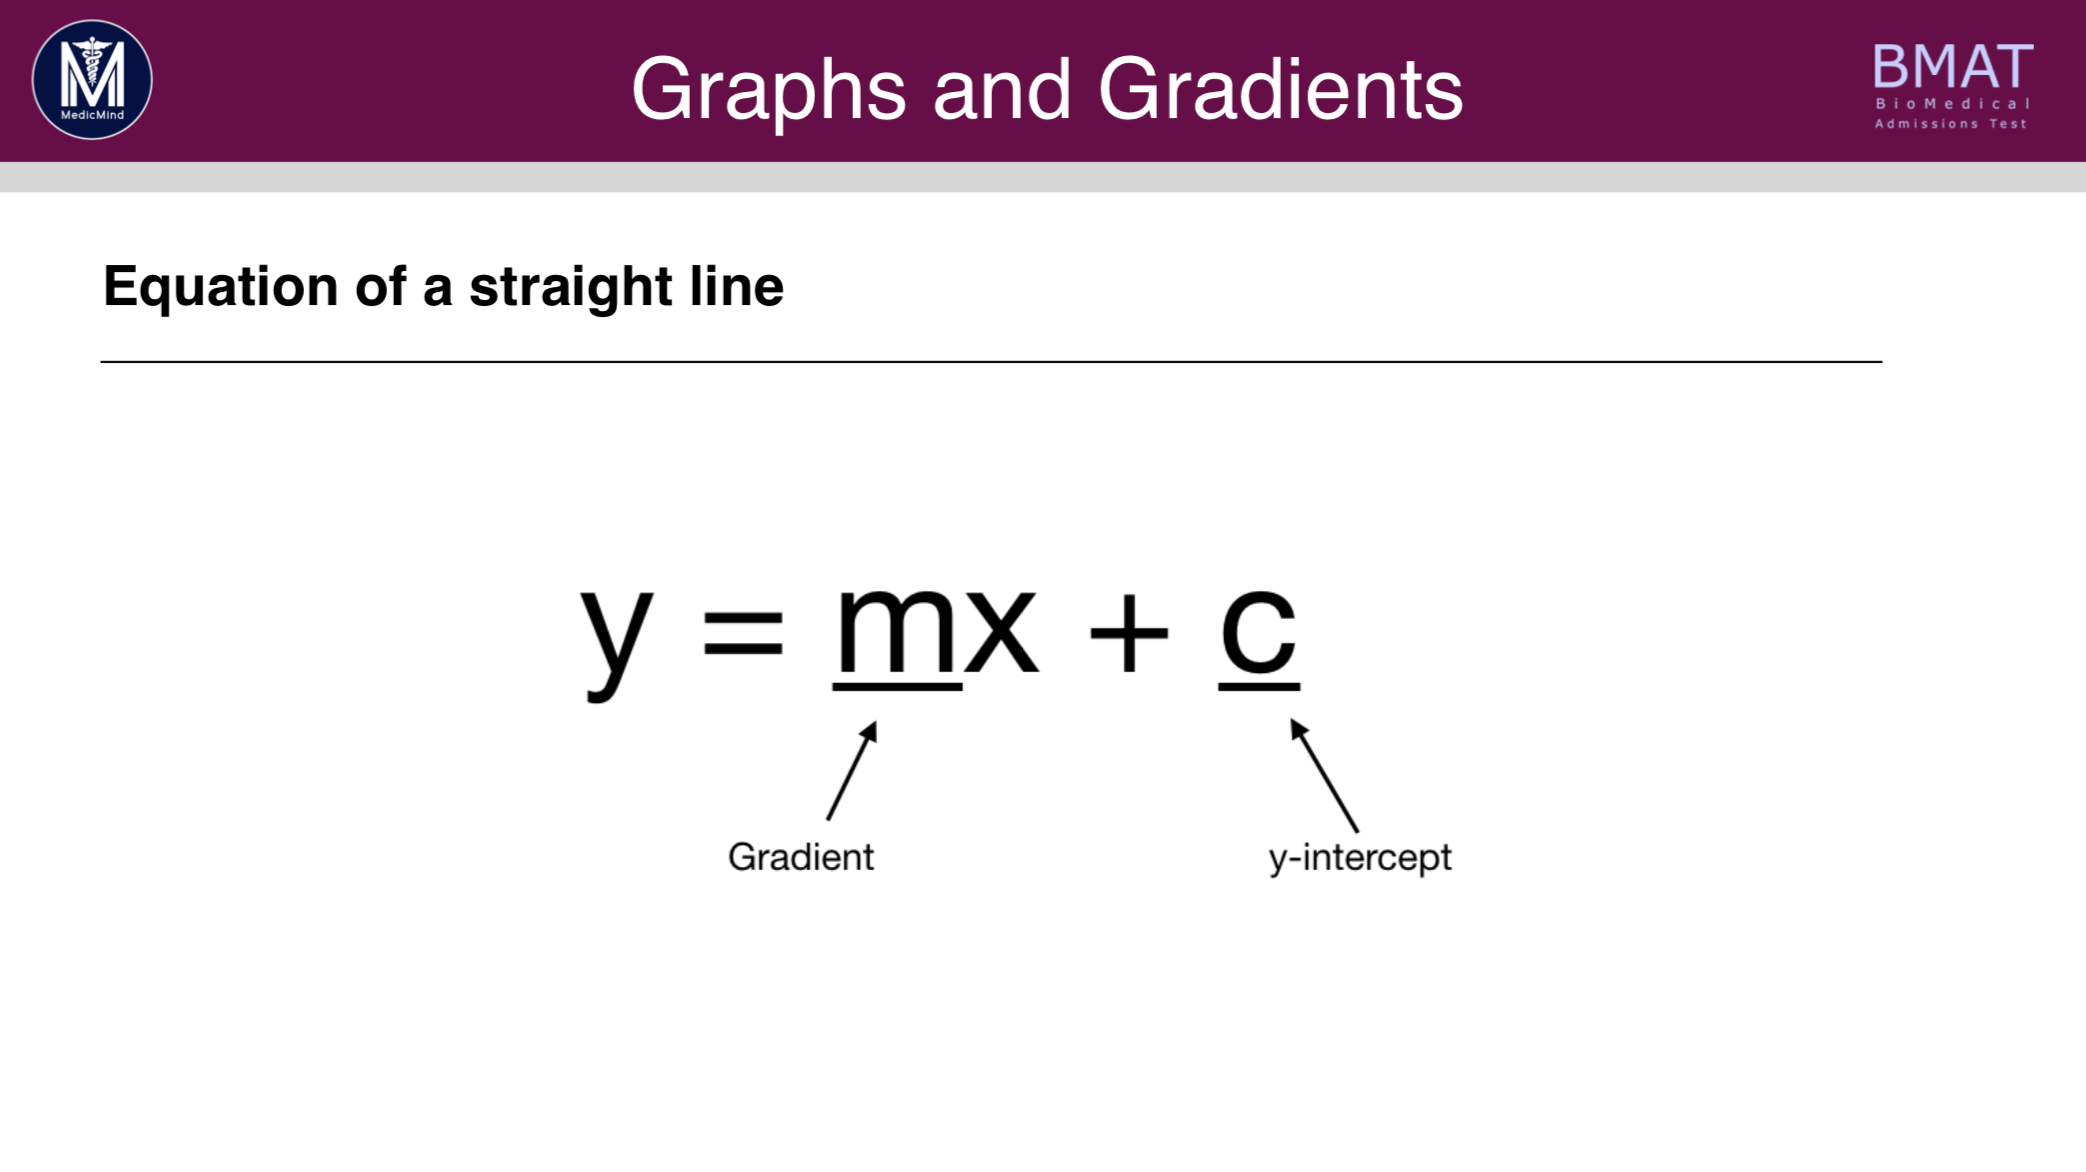 Graphs and Gradients